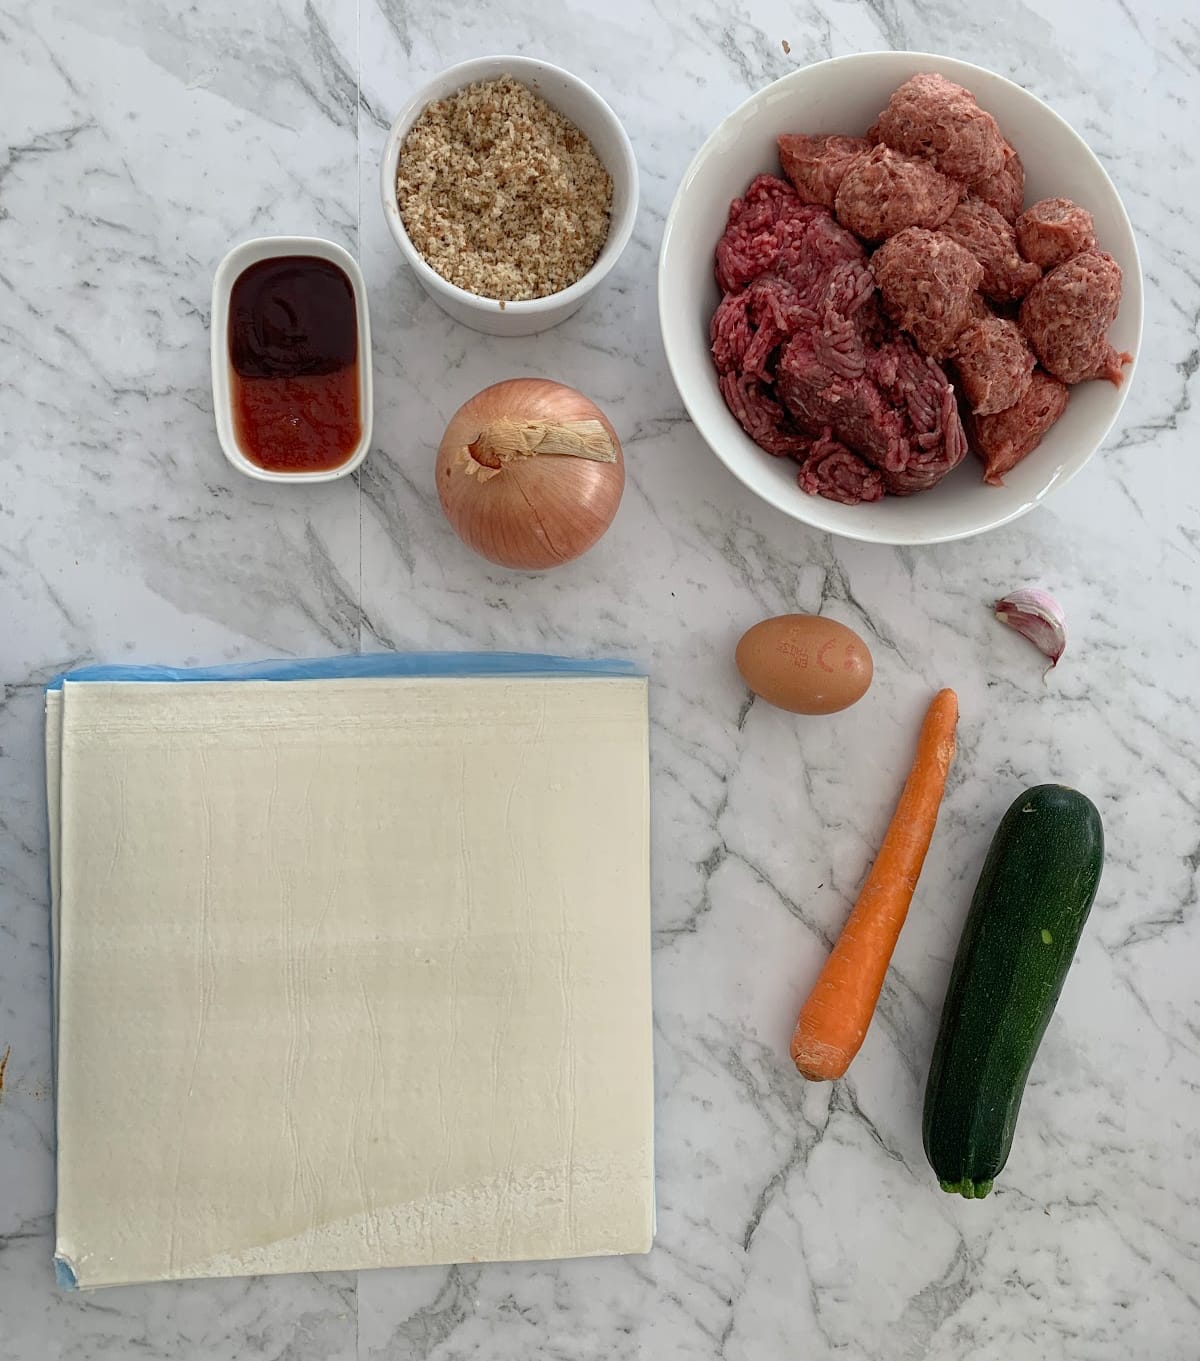 Ingredients to make Thermomix Sausage Rolls.